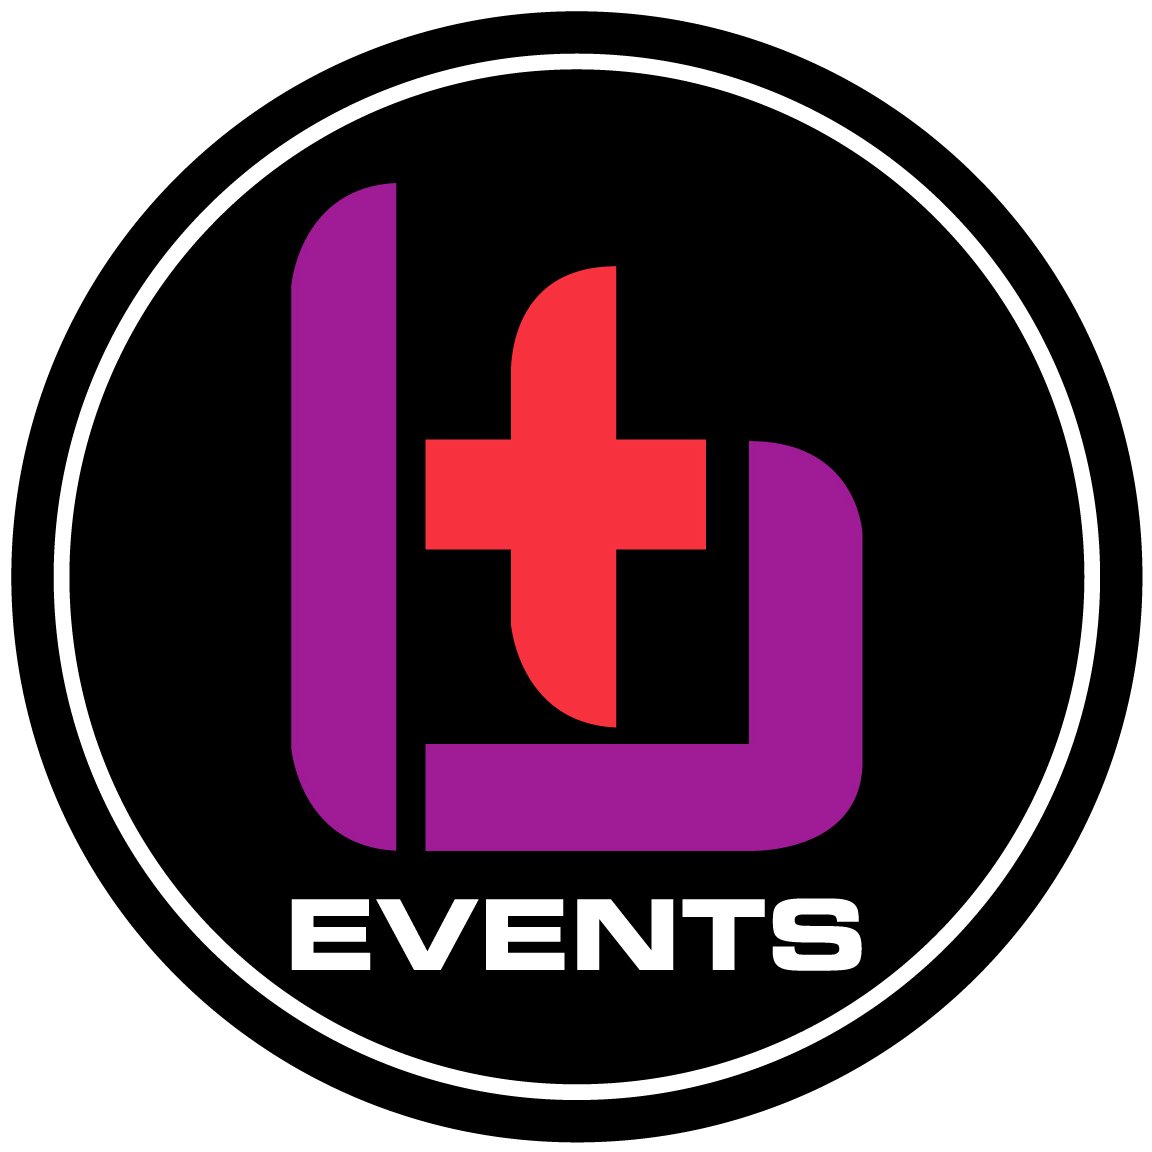 Production, Infrastructure & Events Management Company based in Hertfordshire.